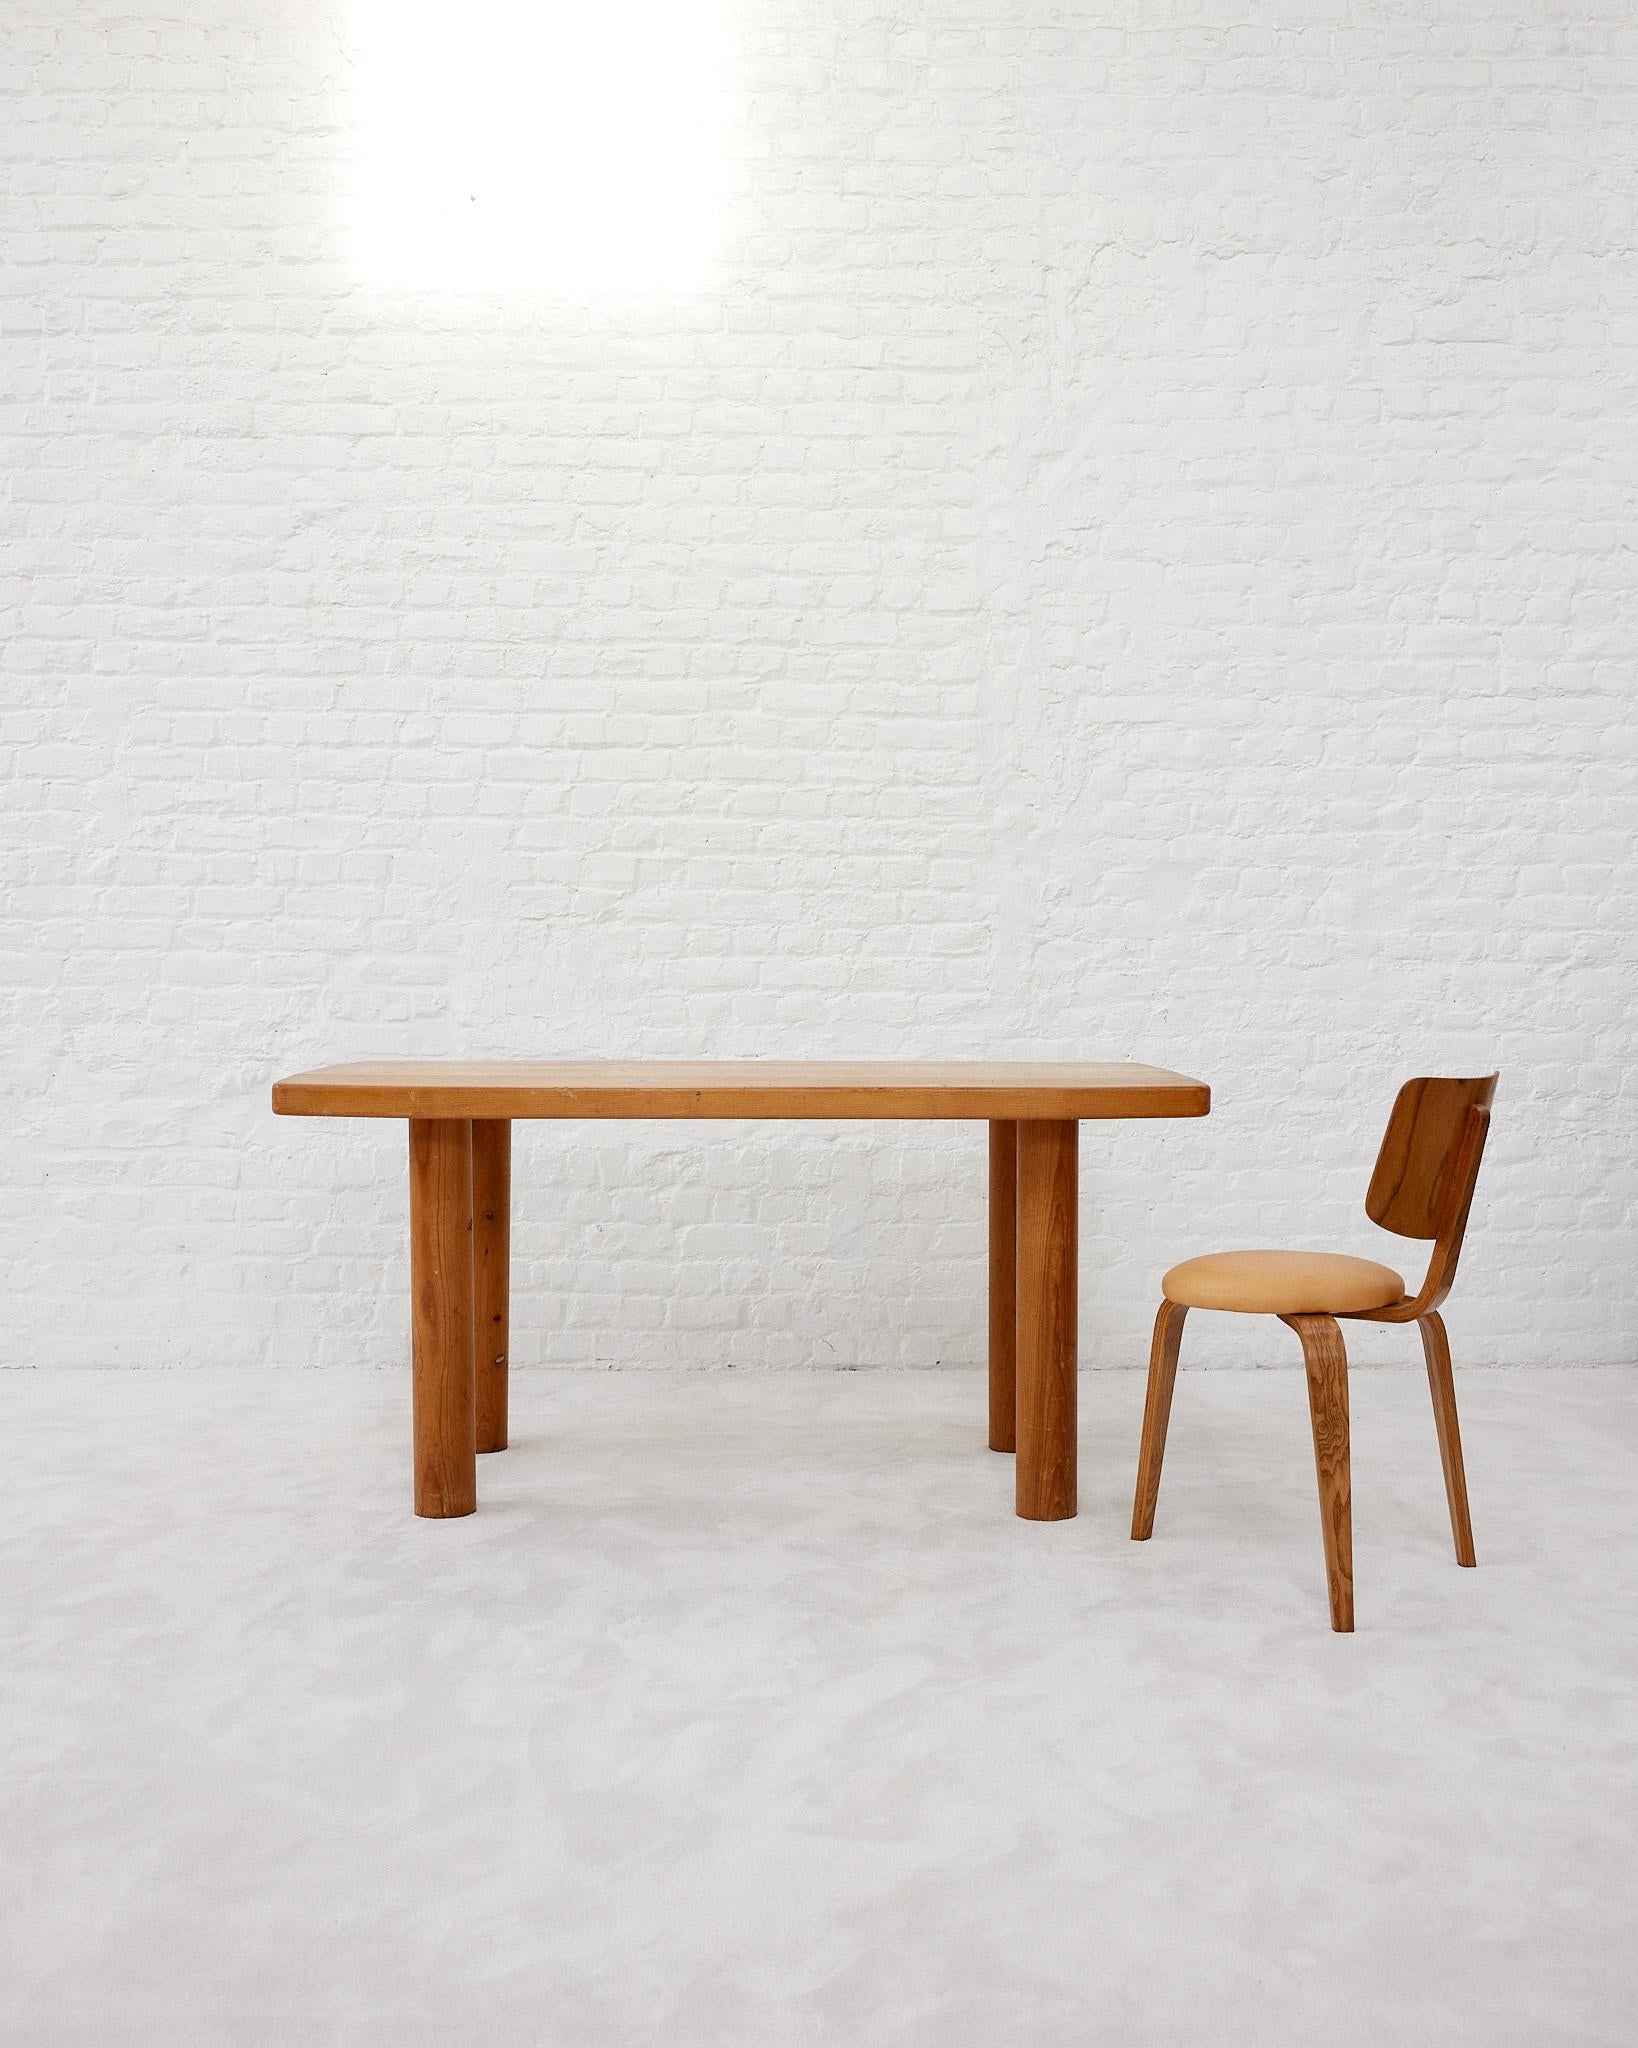 Unique pine wood table in style of Charlotte Perriand, designed in France in 1960s.